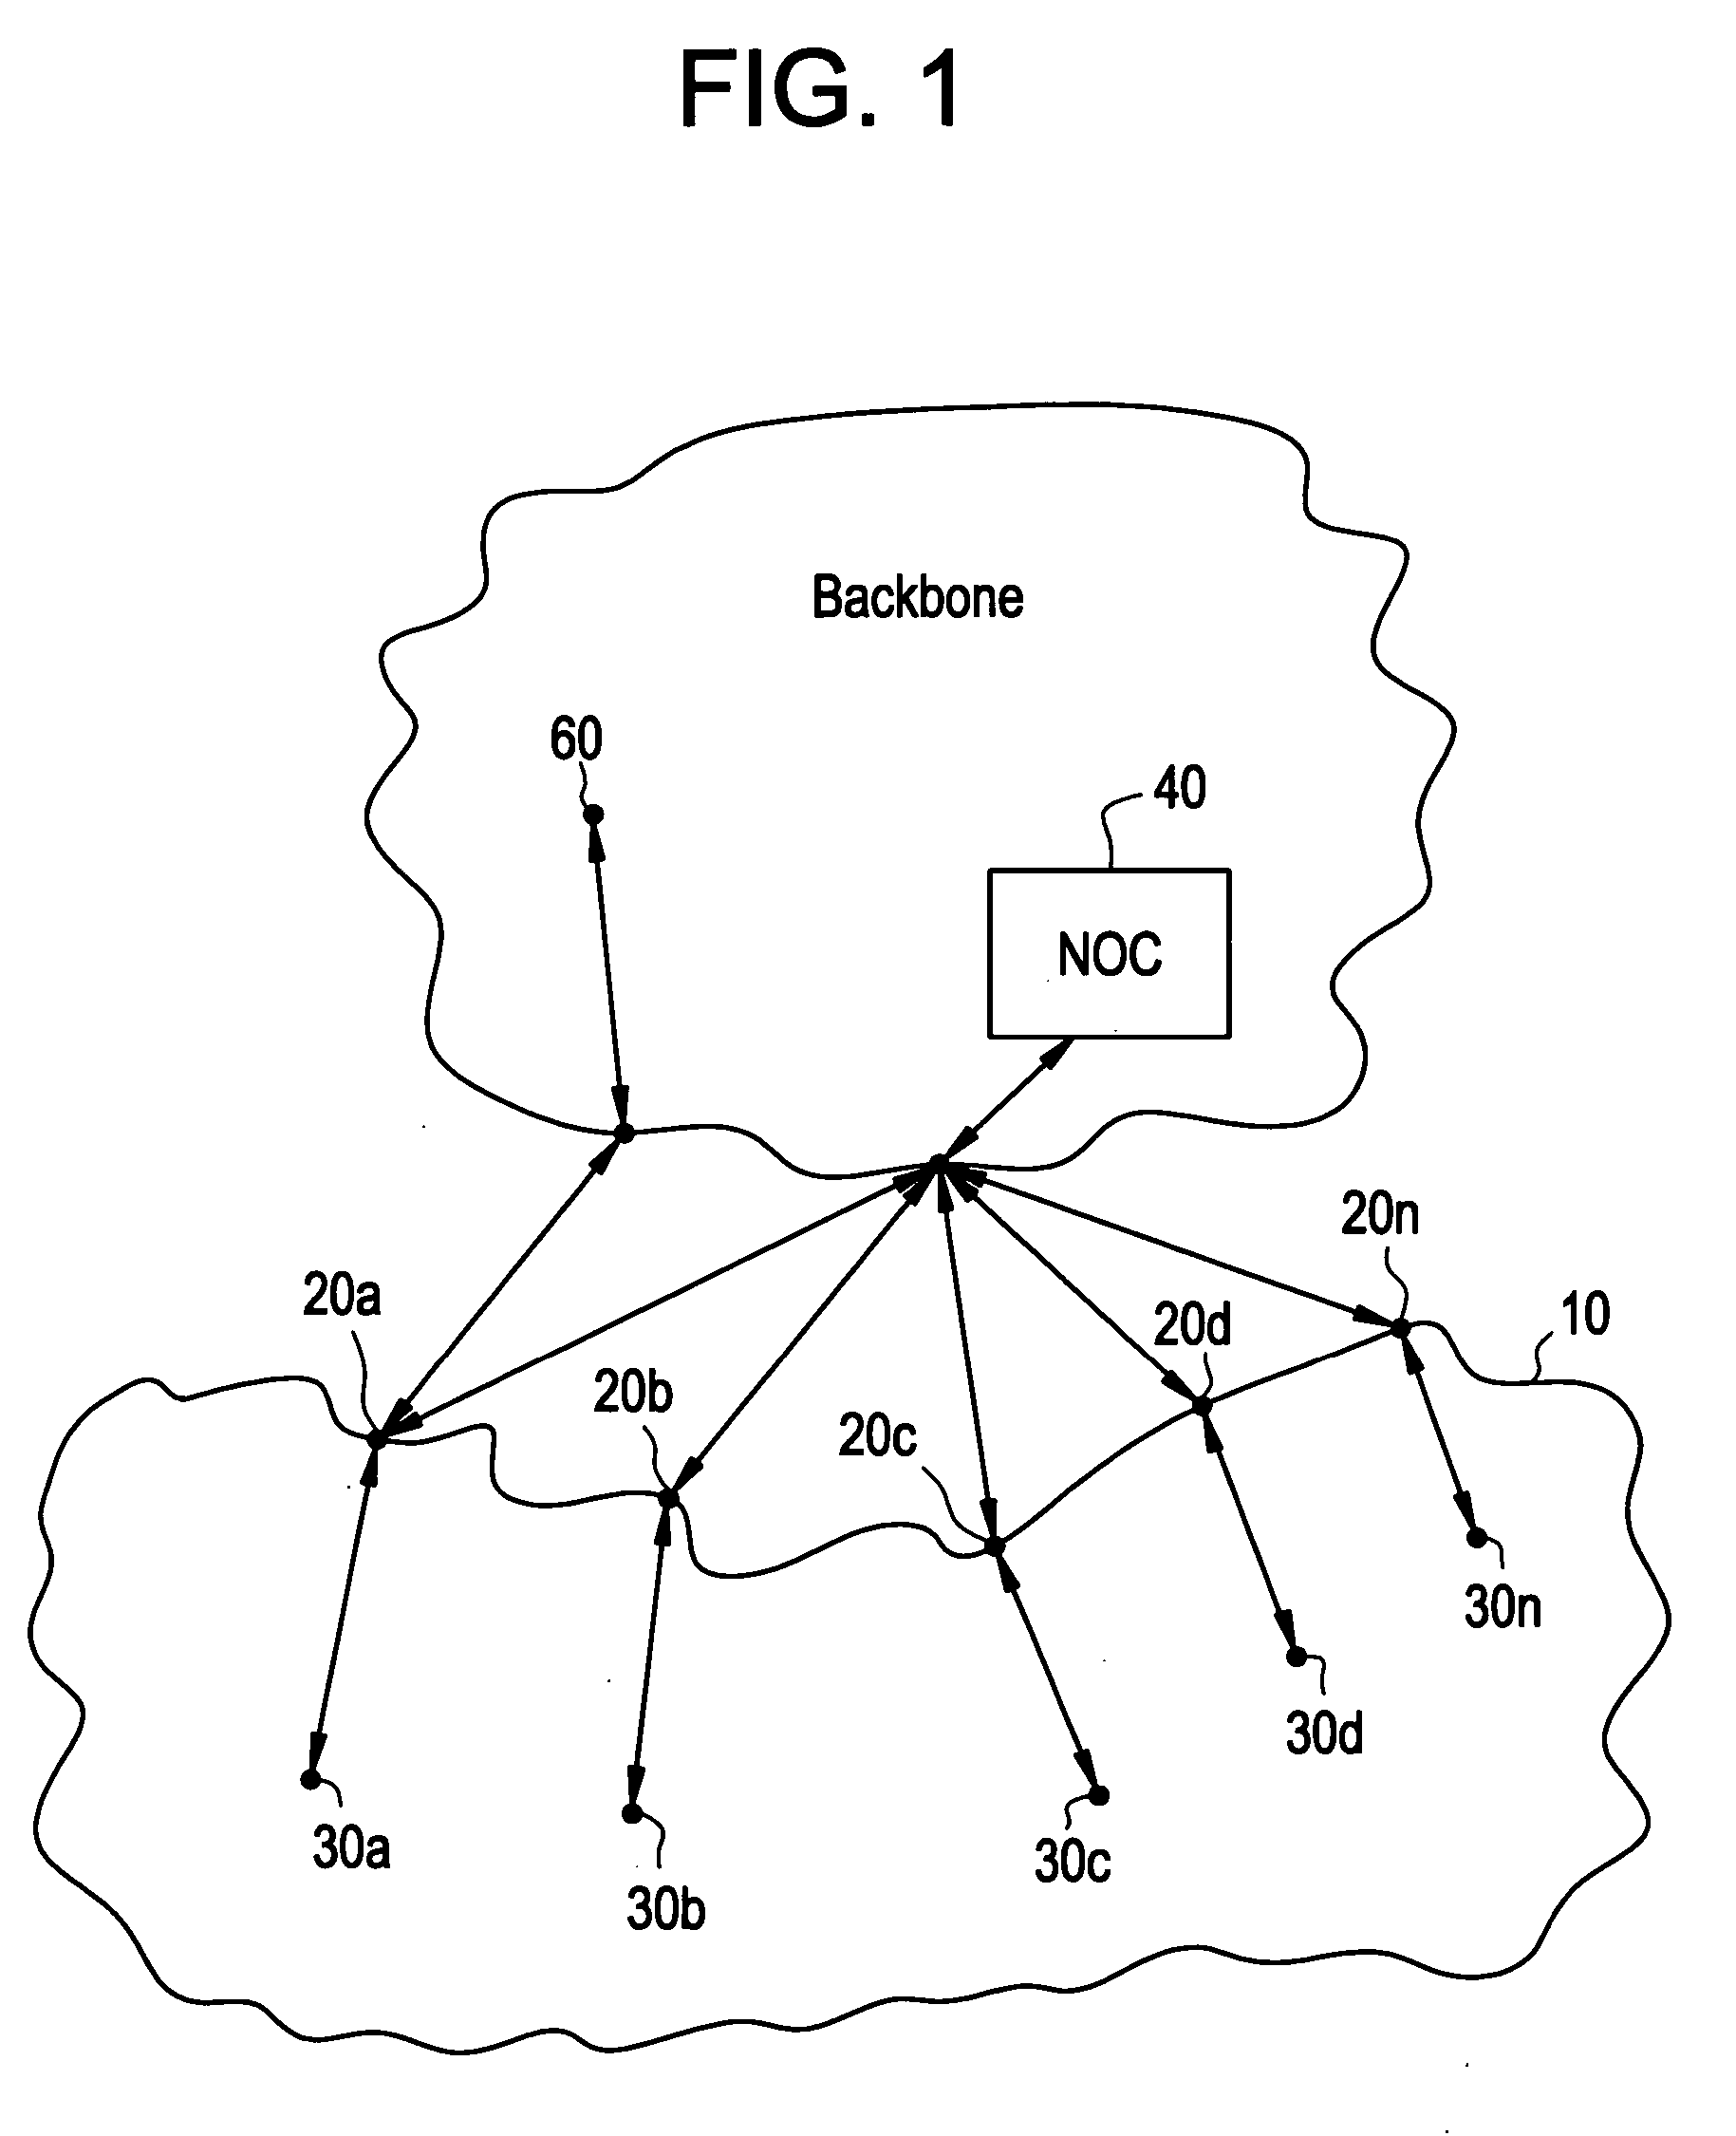 Methods and devices for routing traffic using a configurable access wireless network